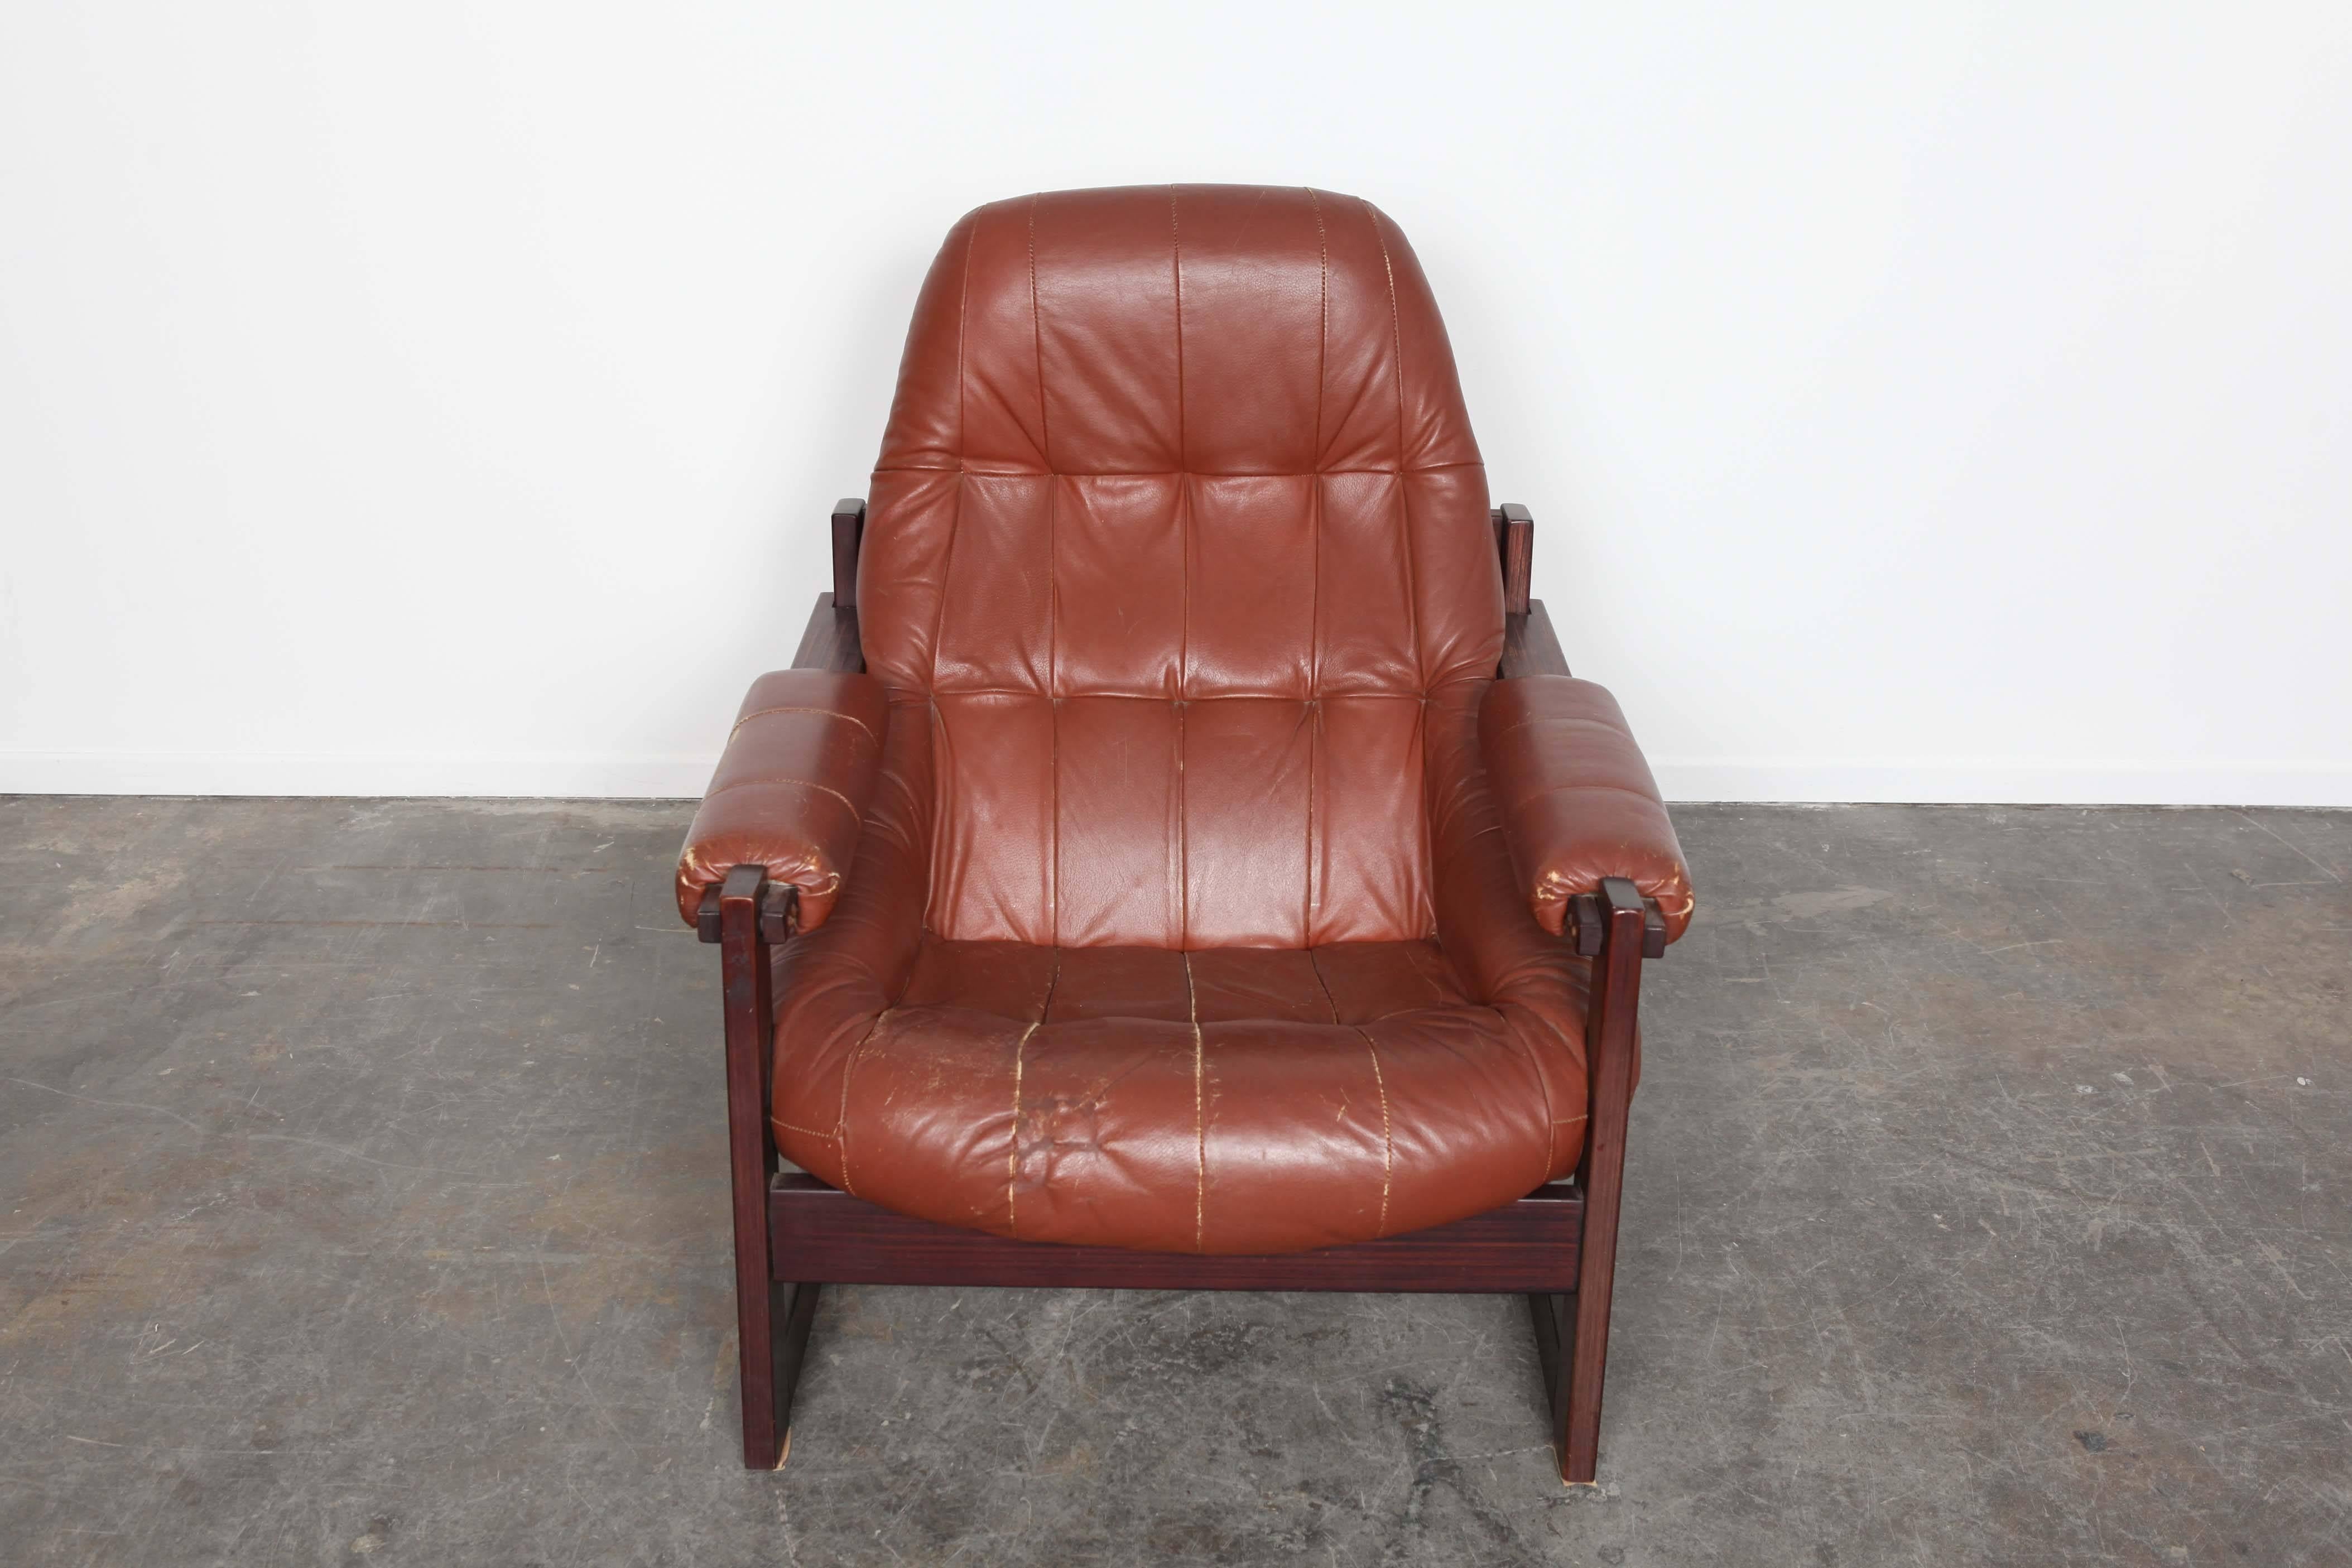 Tall back jatoba wood lounge chair designed by Percival Lafer, in original brown leather, Brazil, 1970's, produced by Lafer MP, model MP-167.